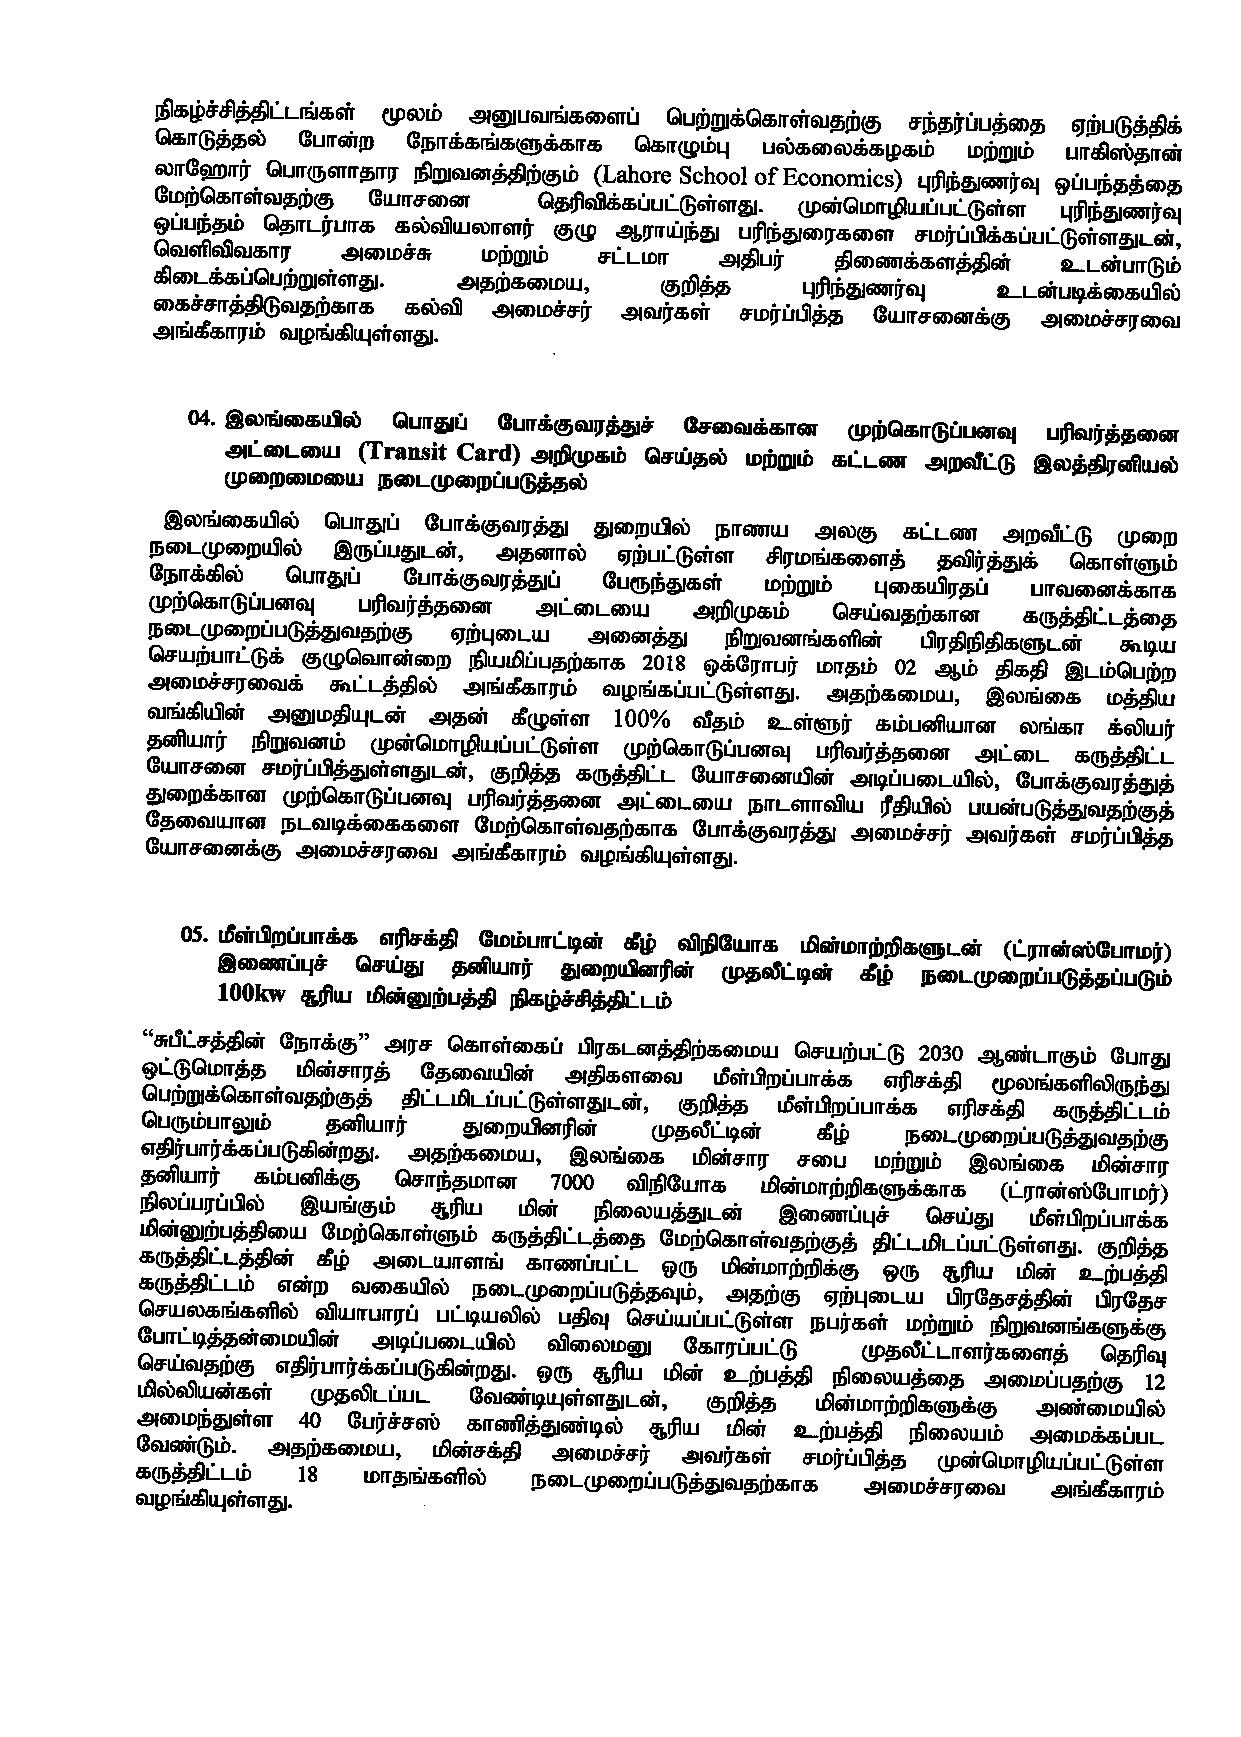 Cabinet Decison on 15.02.2021 Tamil page 002